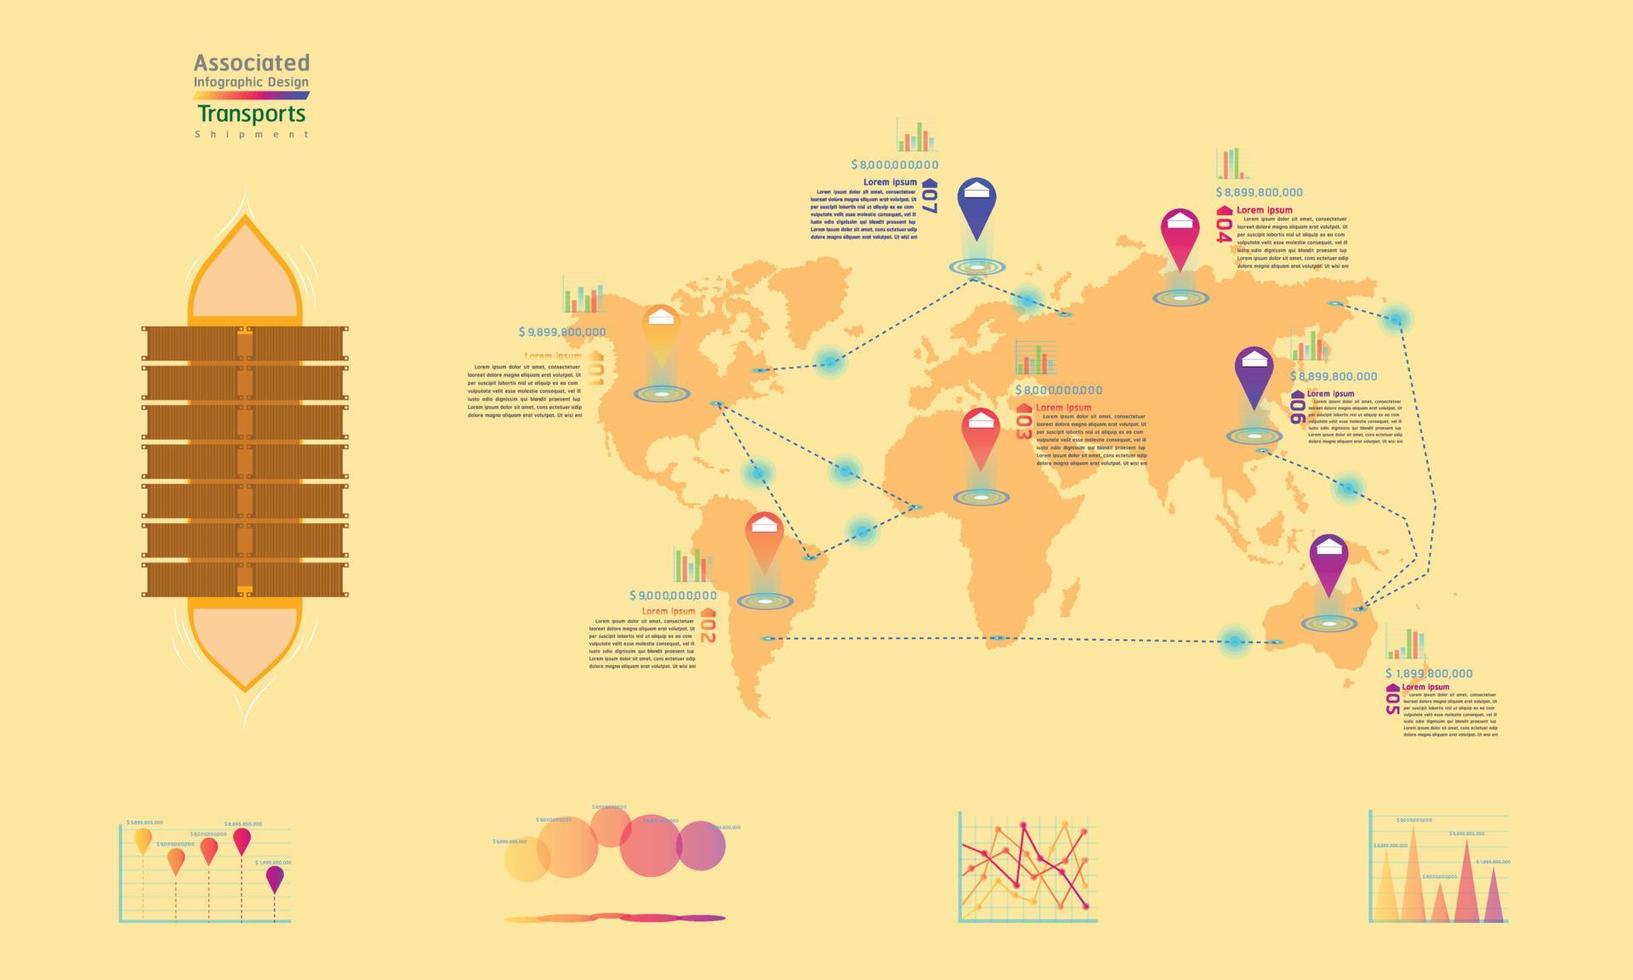 shipment transports associated company factory world map mark point infographic design with summary graph chart data egg tone vector illustration eps10